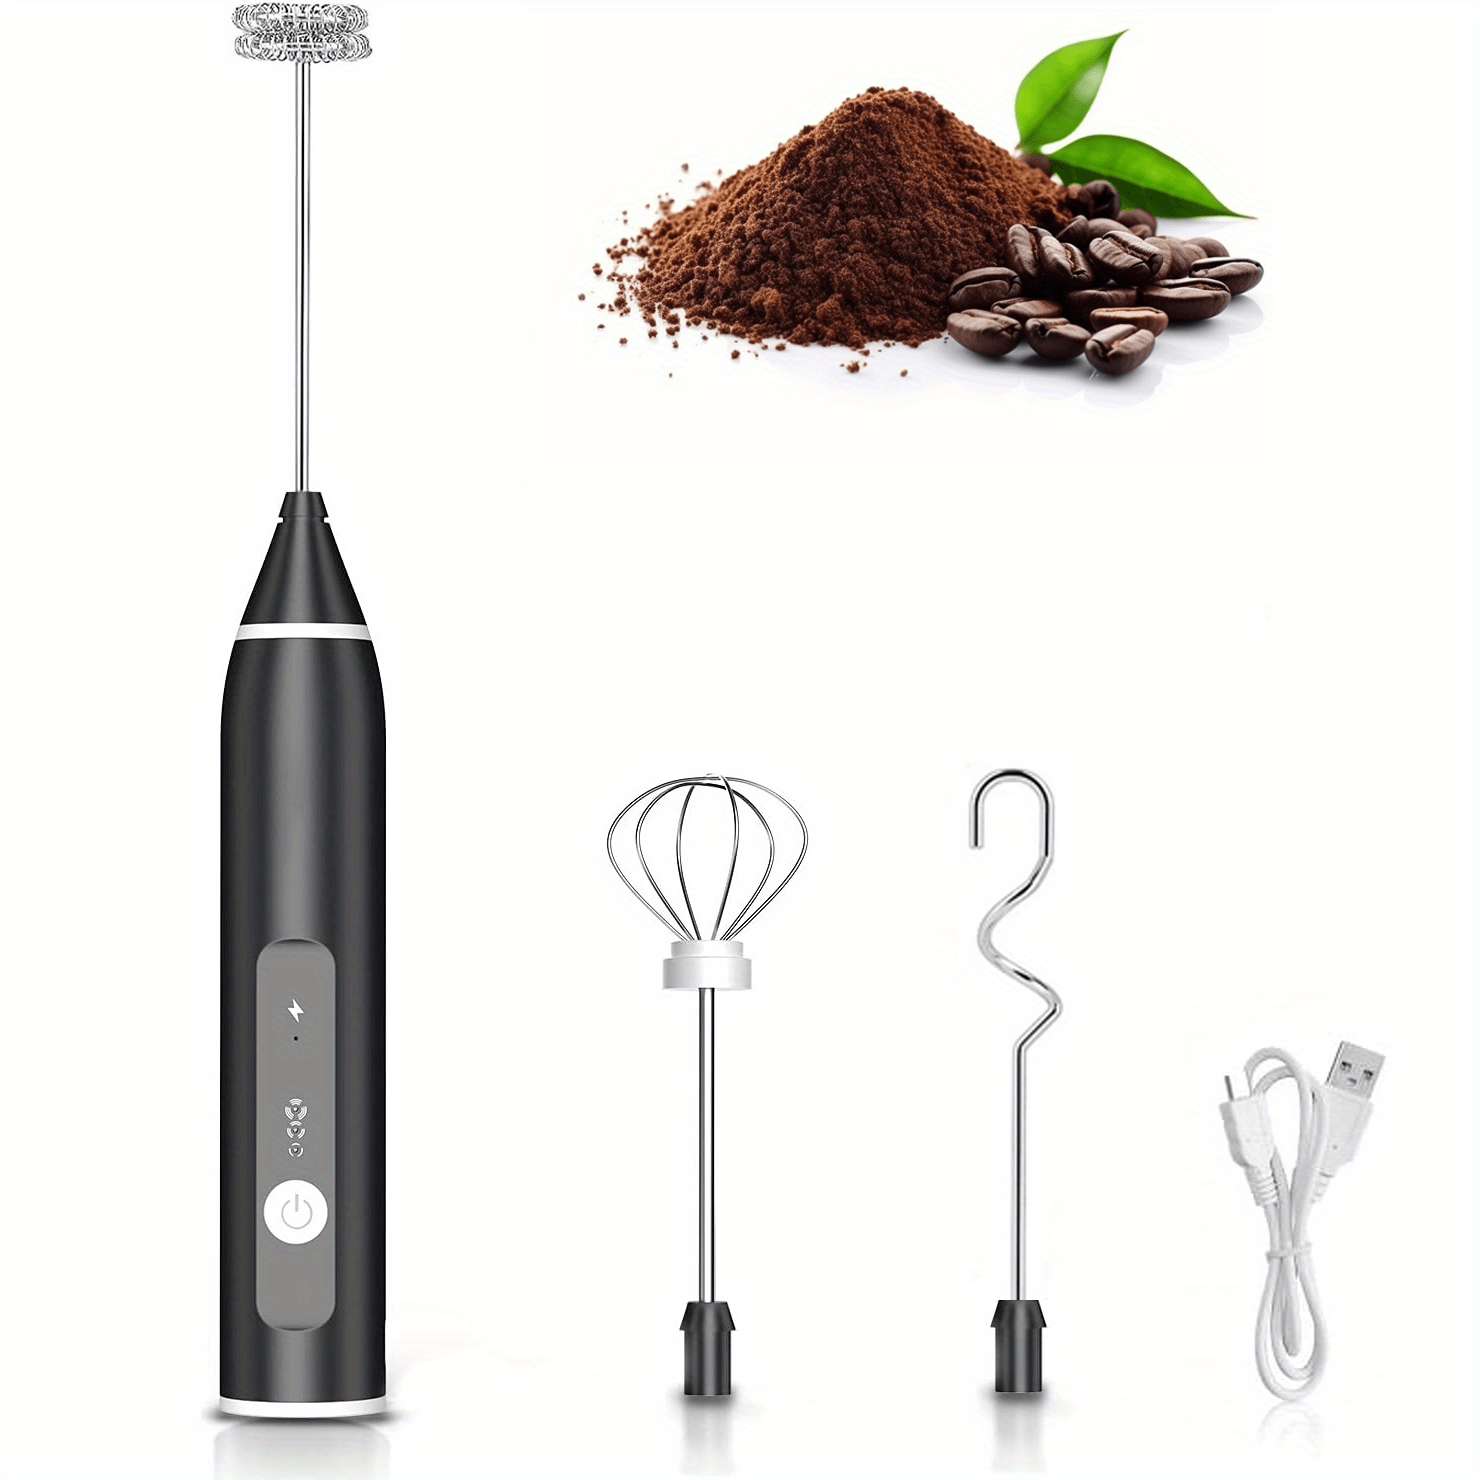 Rechargeable USB Whisk Frother